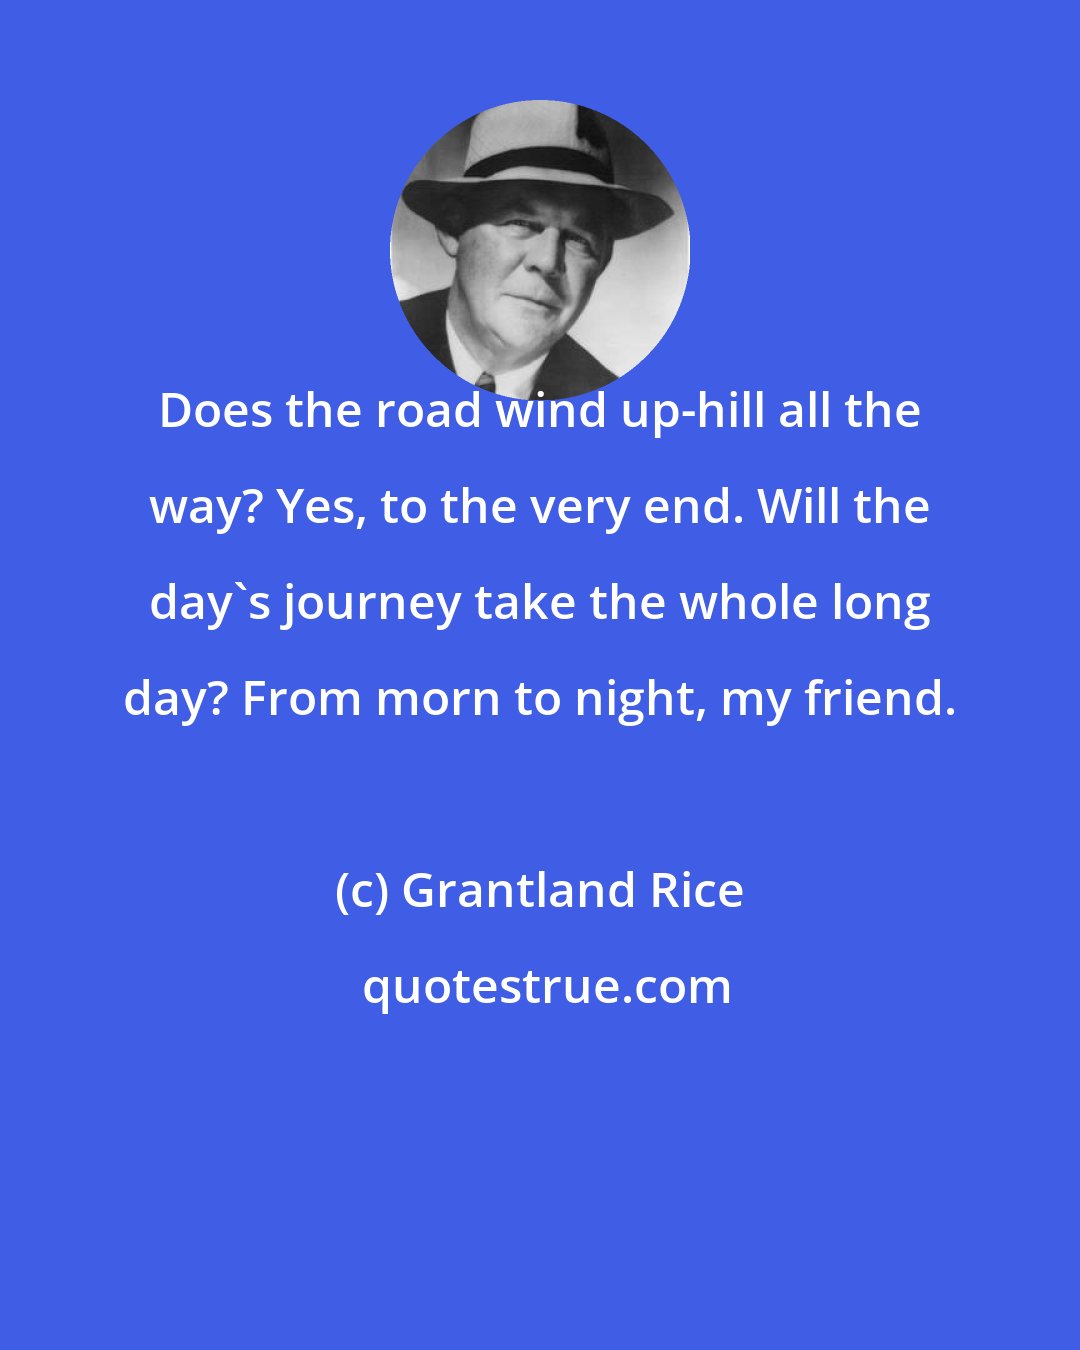 Grantland Rice: Does the road wind up-hill all the way? Yes, to the very end. Will the day's journey take the whole long day? From morn to night, my friend.